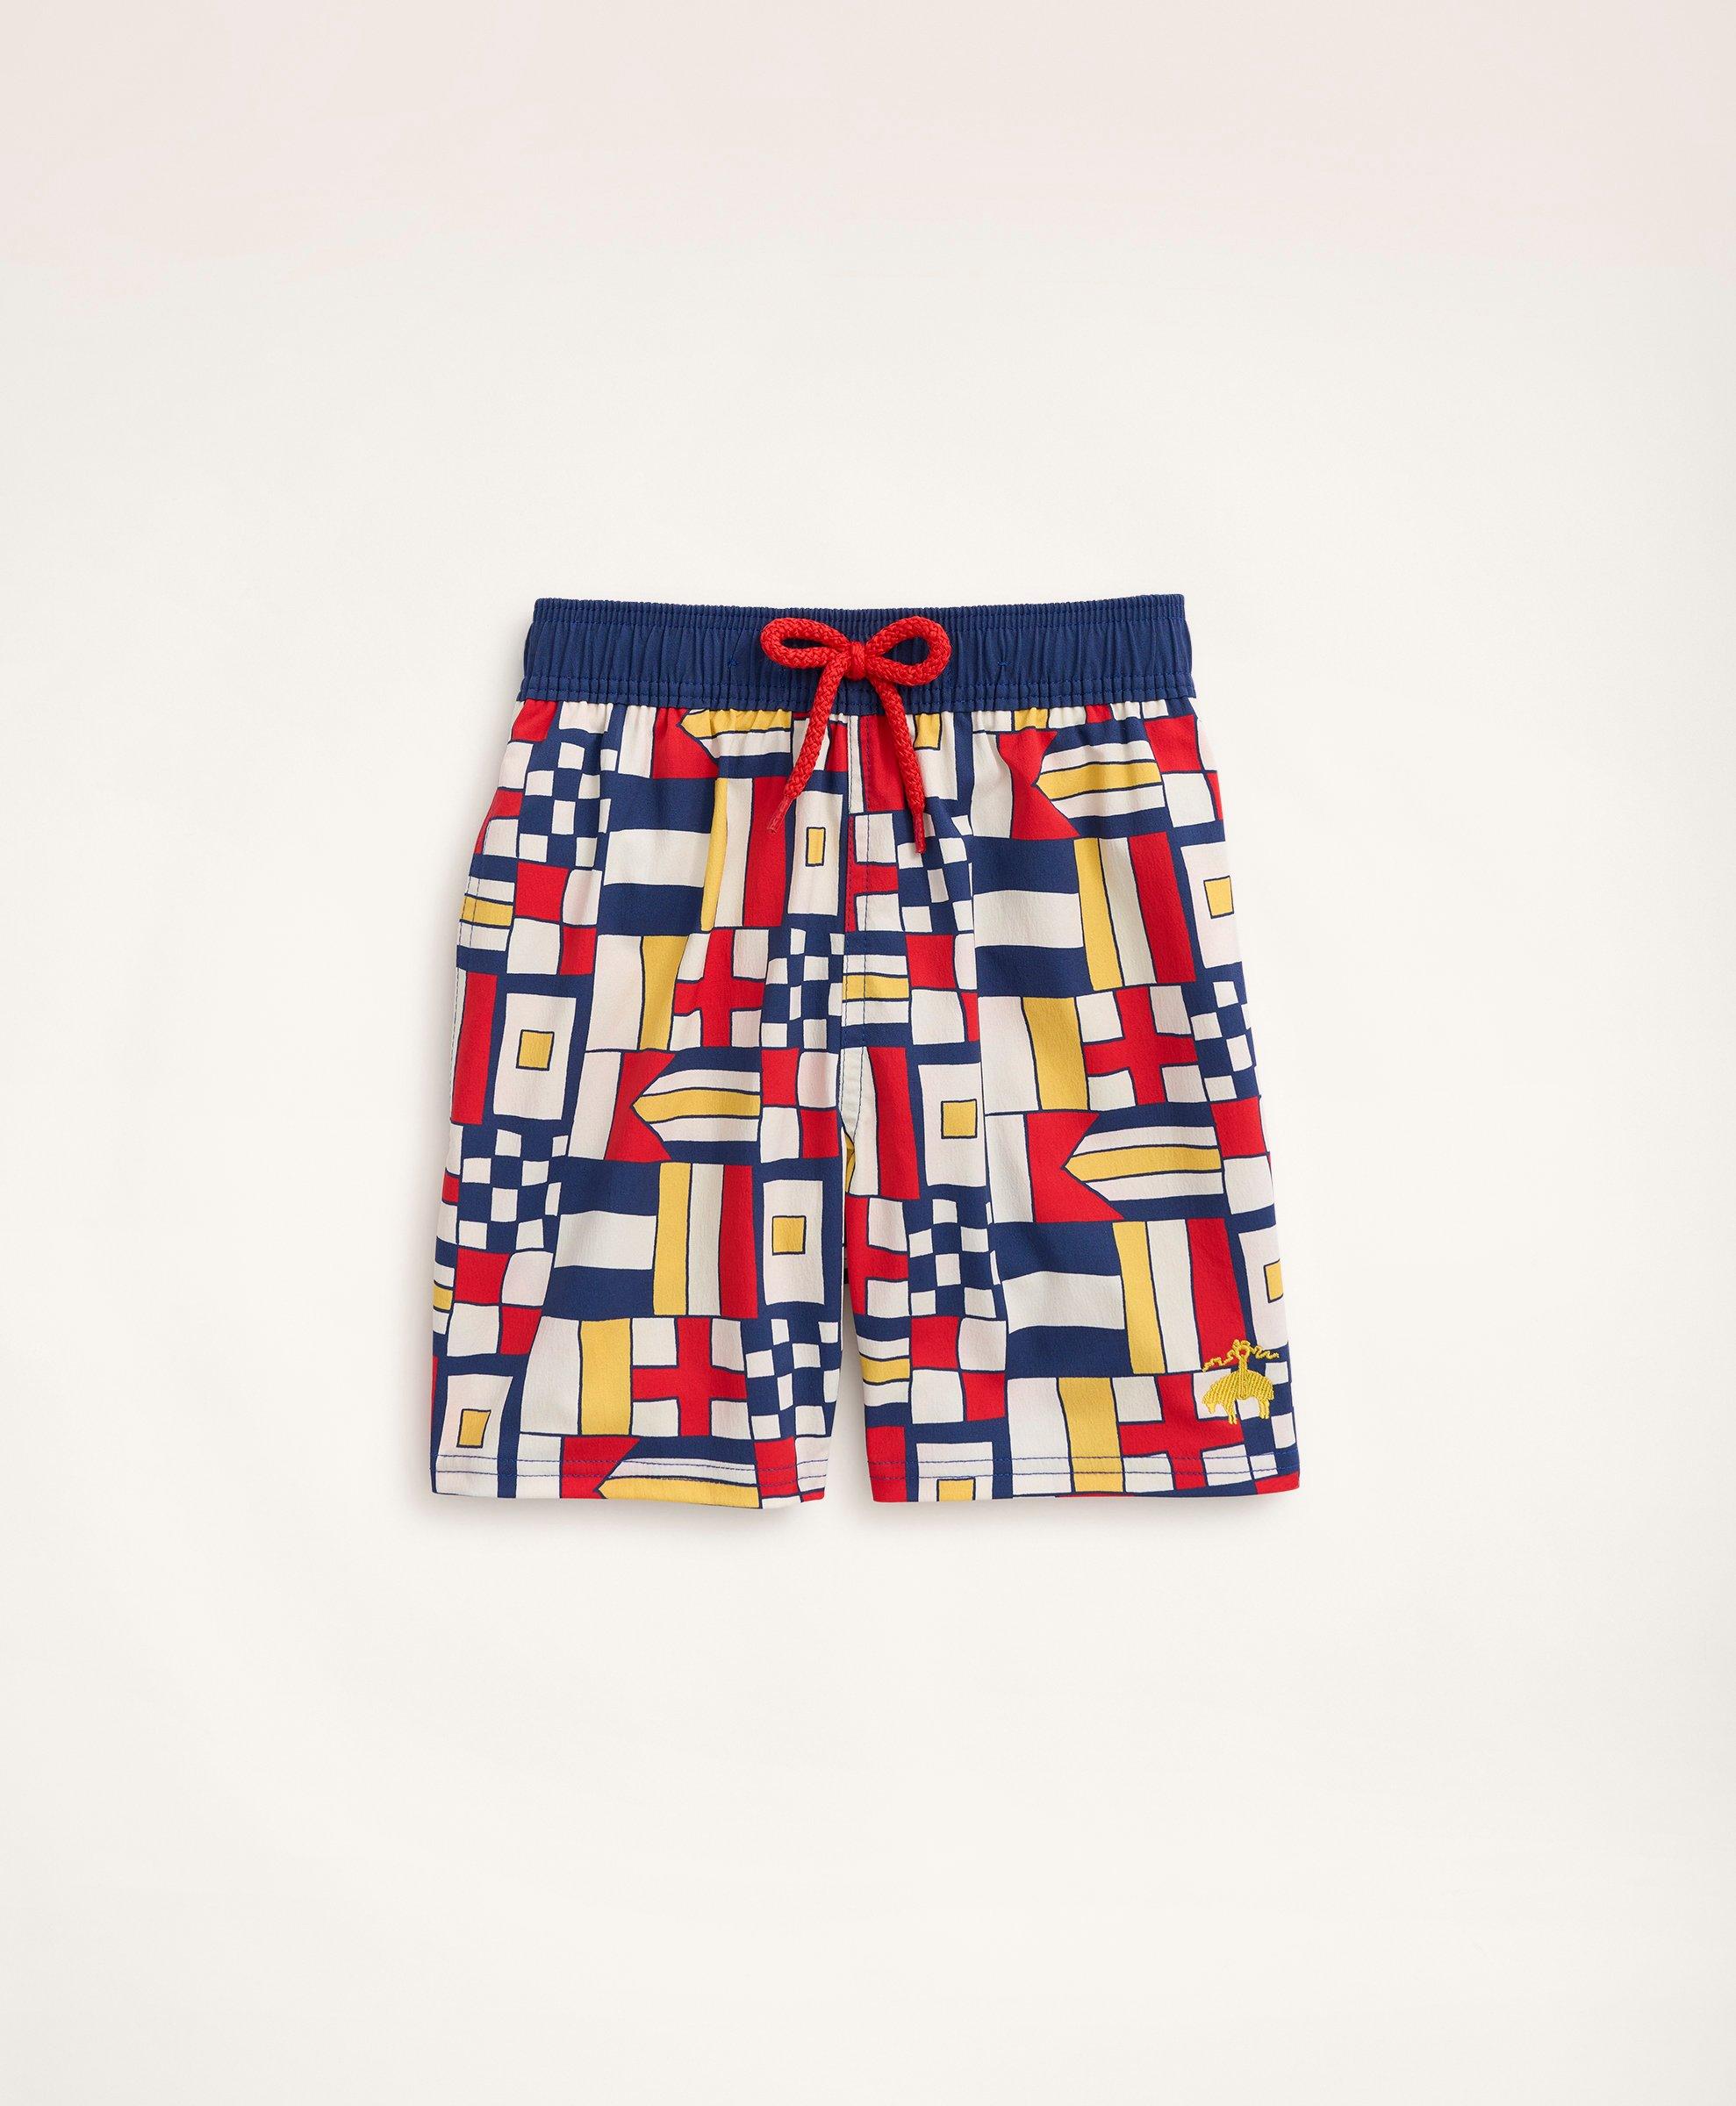 Boys Brooks Brothers Et Vilebrequin Swim Trunks in the Mixed Signals Print, image 1